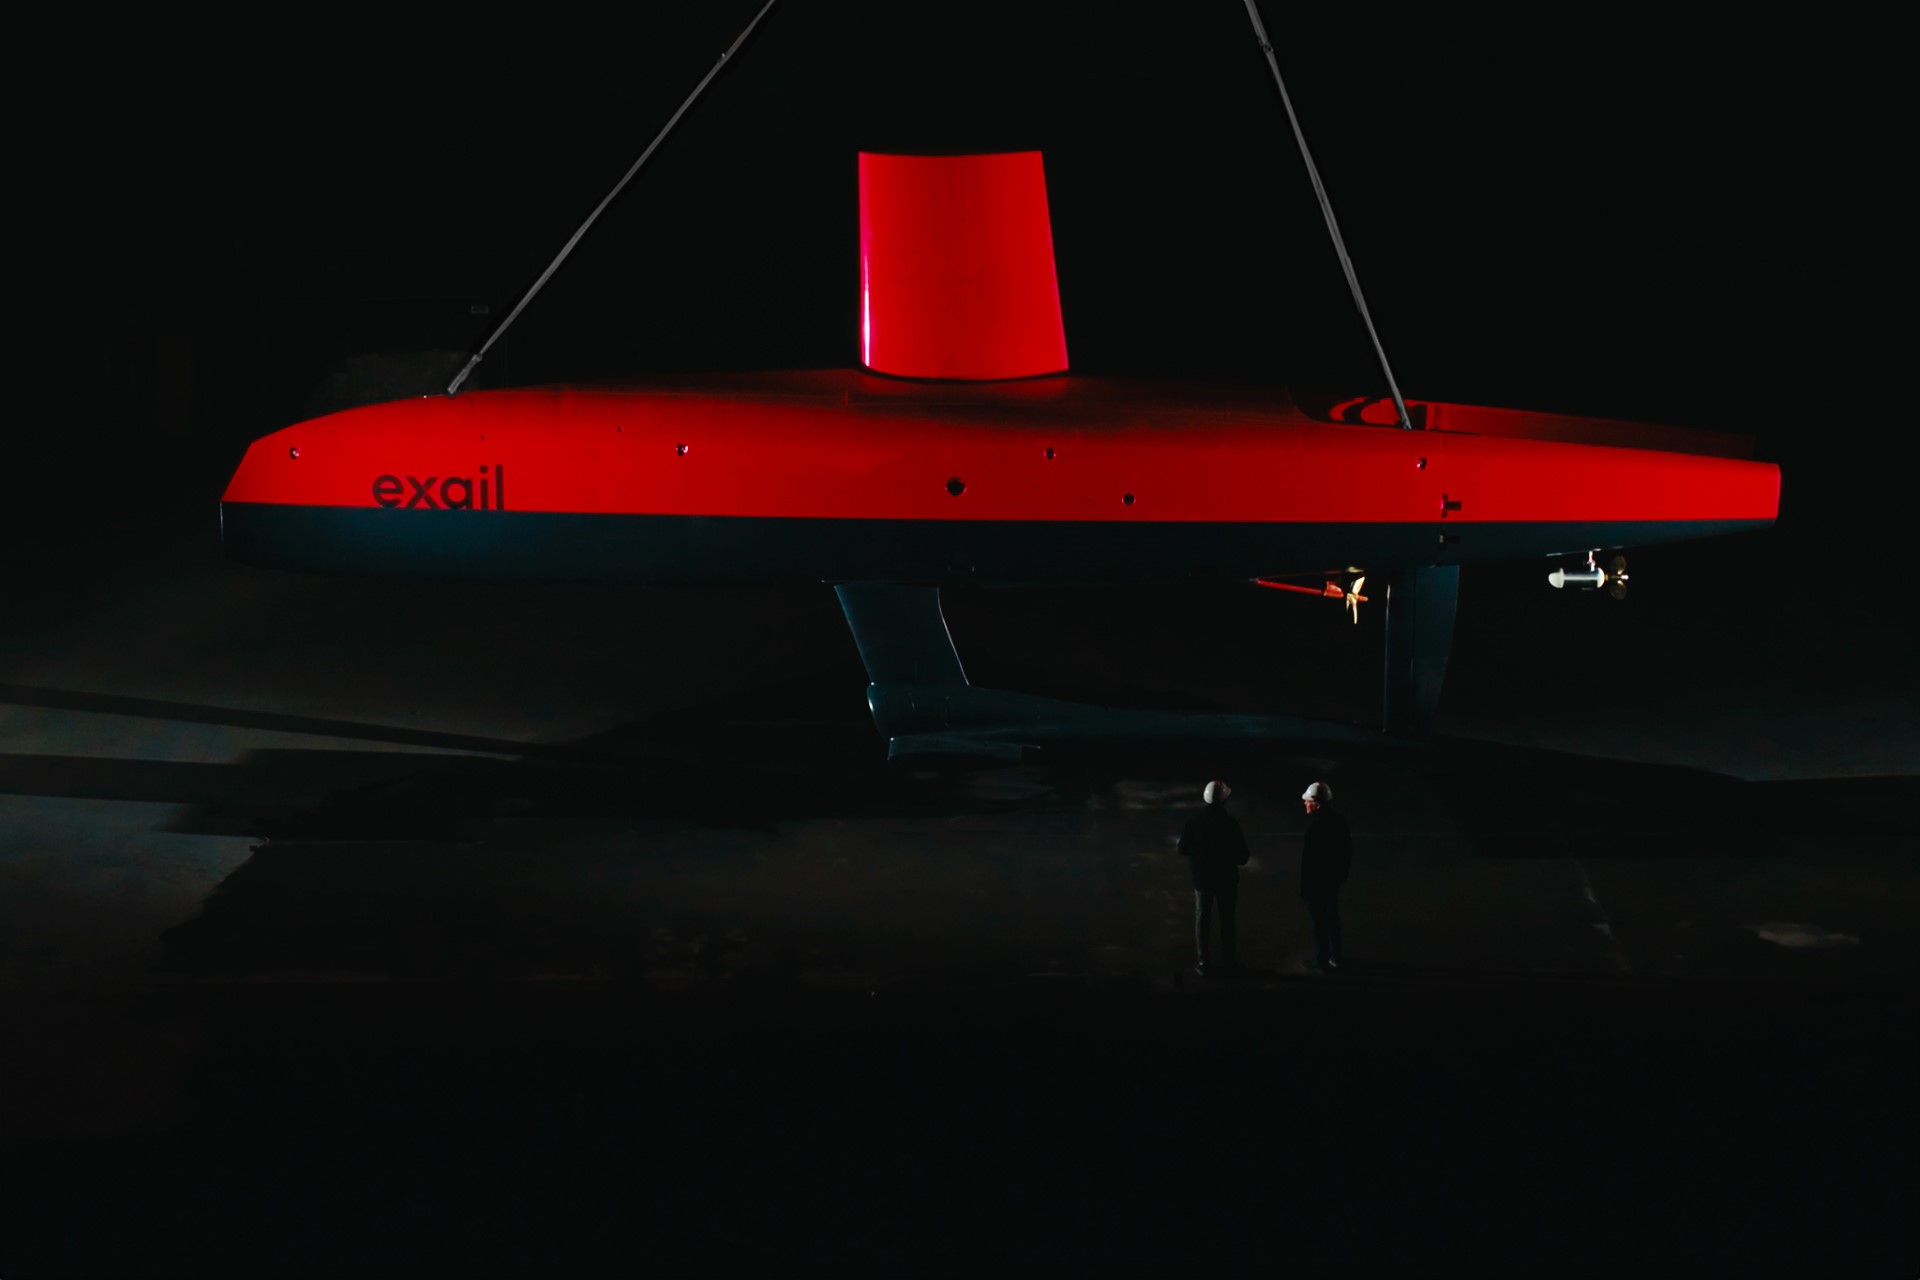 UK-based maritime autonomy solutions company Exail has introduced its transoceanic uncrewed surface vessel (USV), the Drix O-16 that can deploy multiple payloads and subsea assets